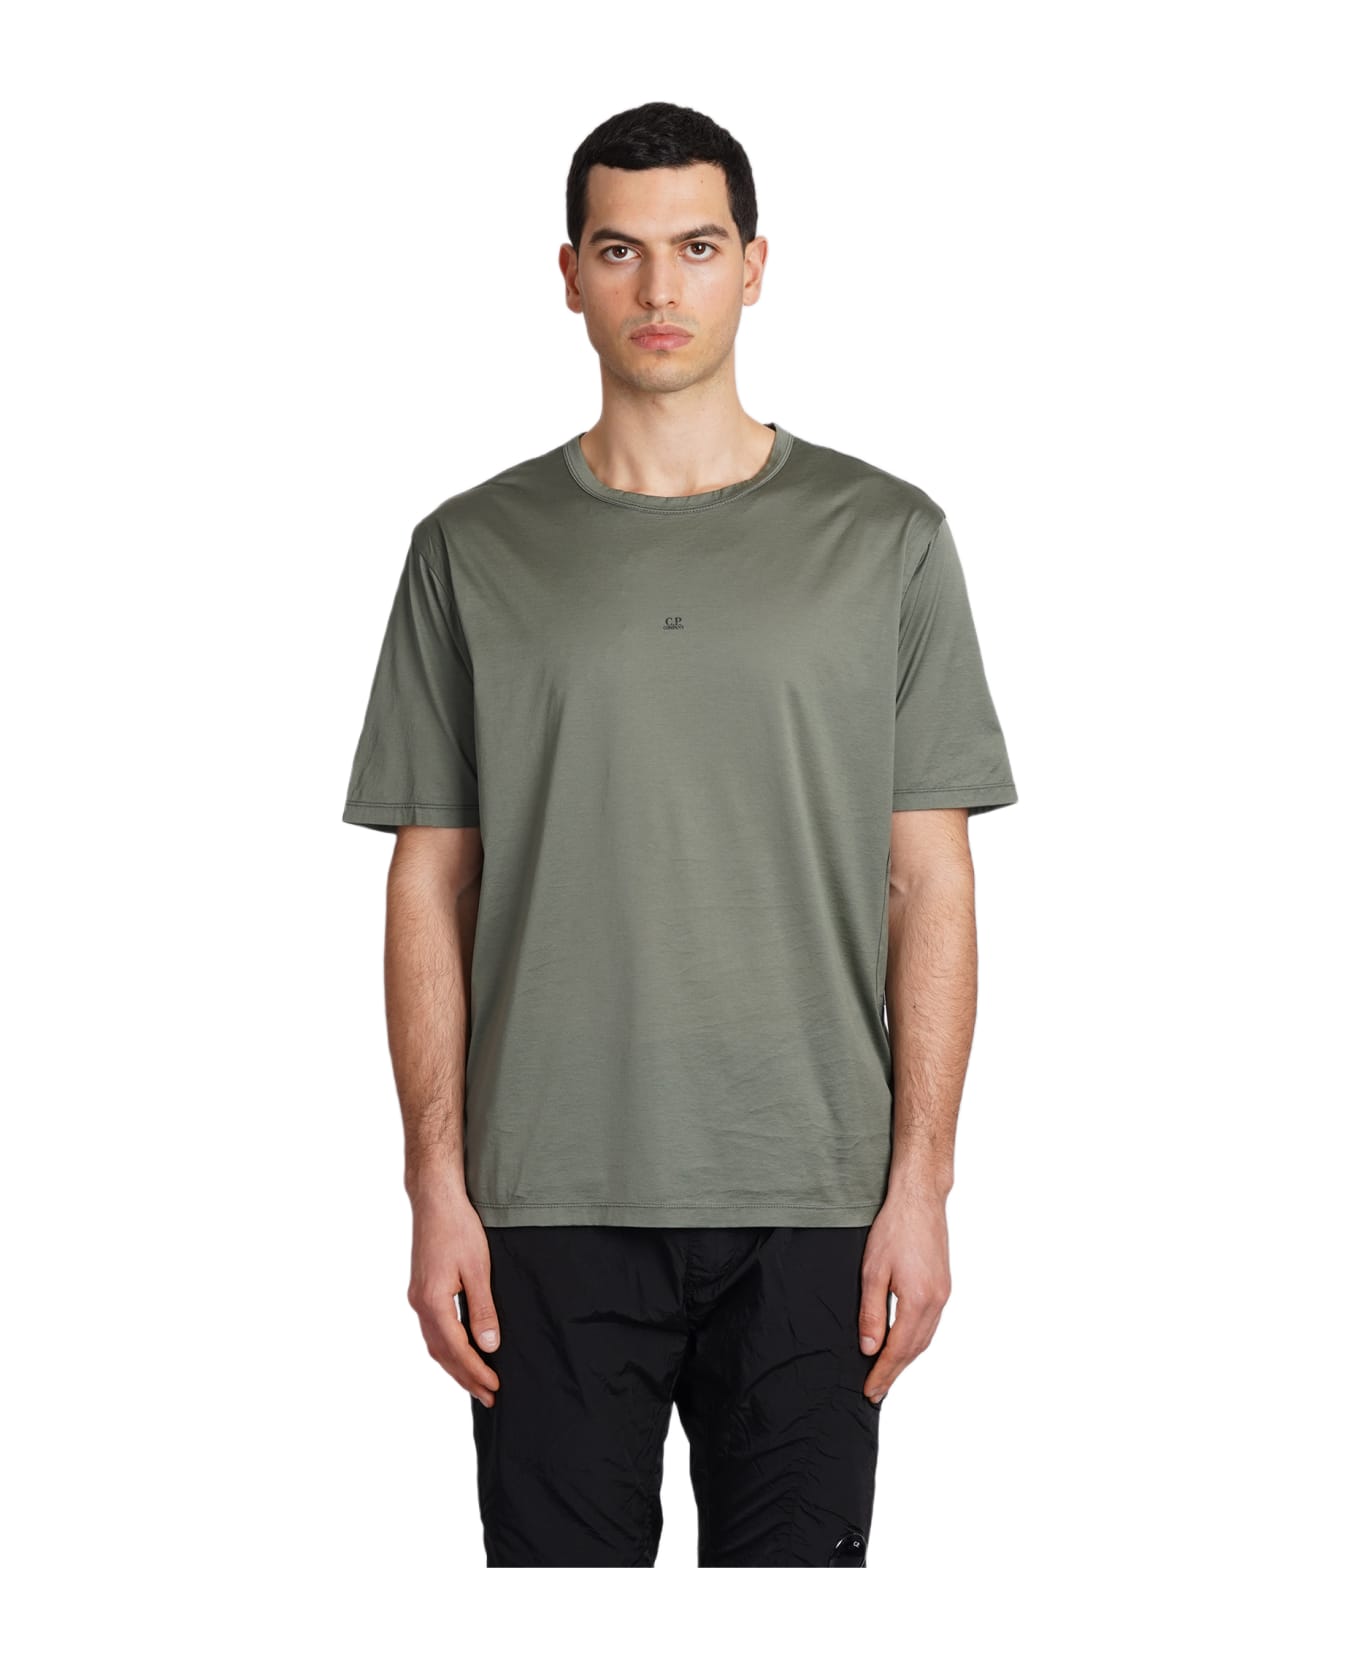 C.P. Company T-shirt In Green Cotton - green シャツ